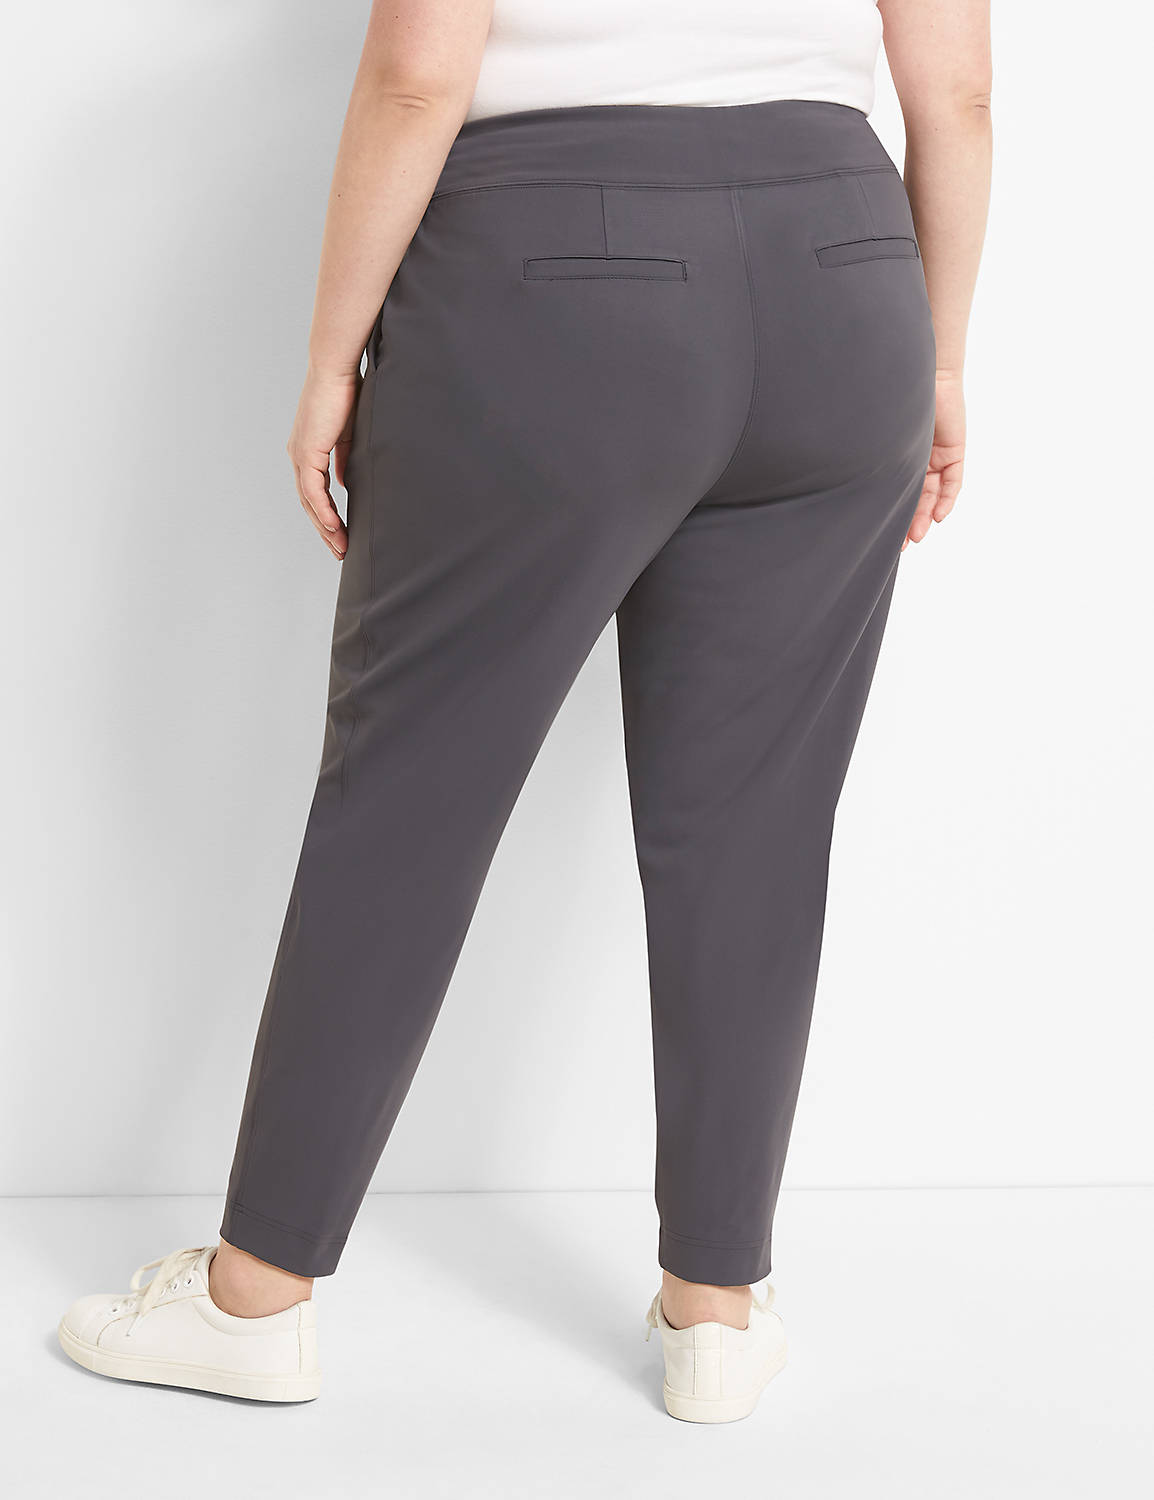 1105749 F Knit Stretch Trouser Product Image 2